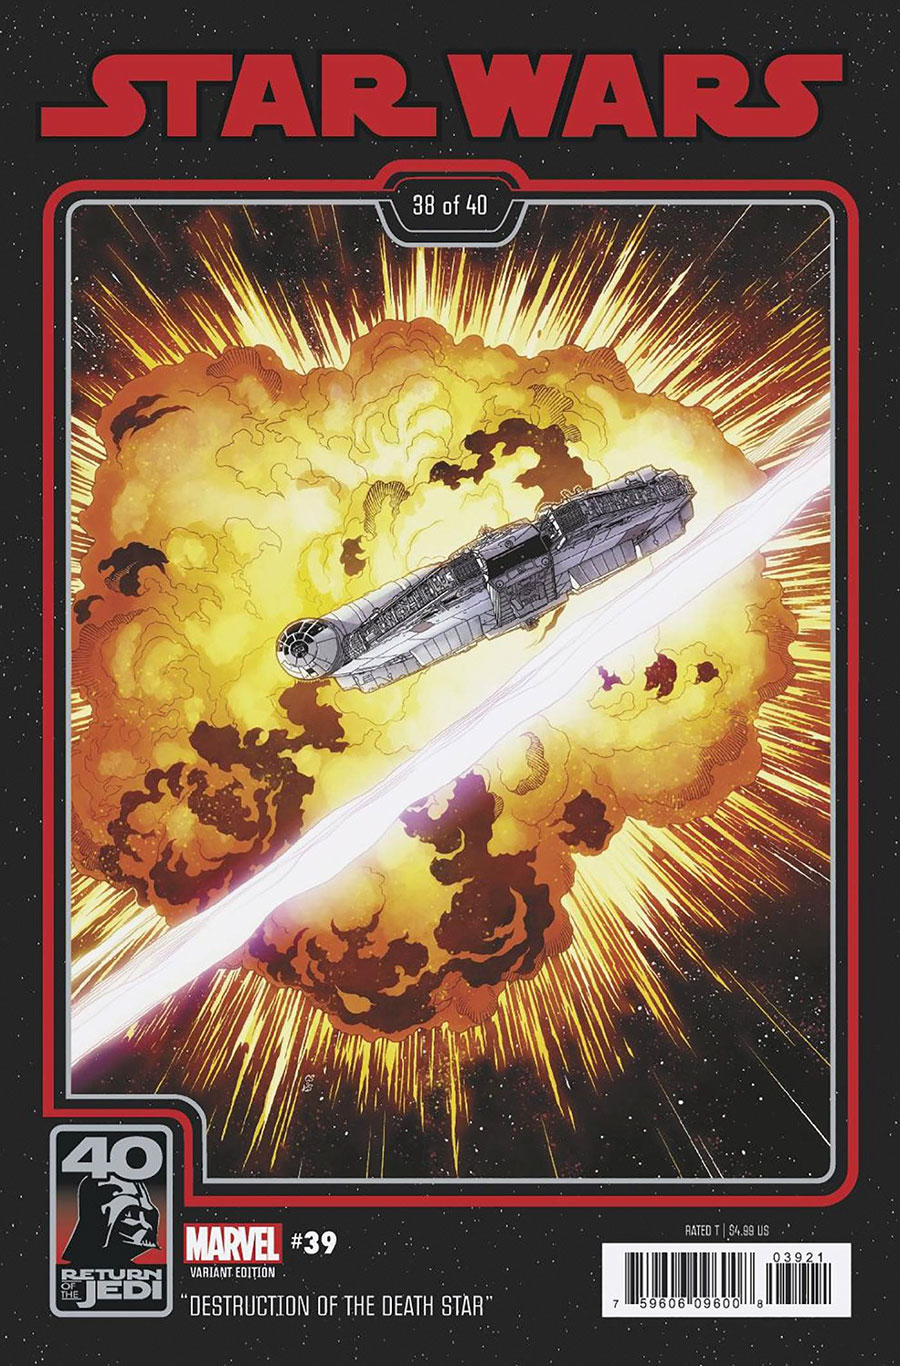 Star Wars Vol 5 #39 Cover B Variant Chris Sprouse Return Of The Jedi 40th Anniversary Cover (Dark Droids Tie-In)